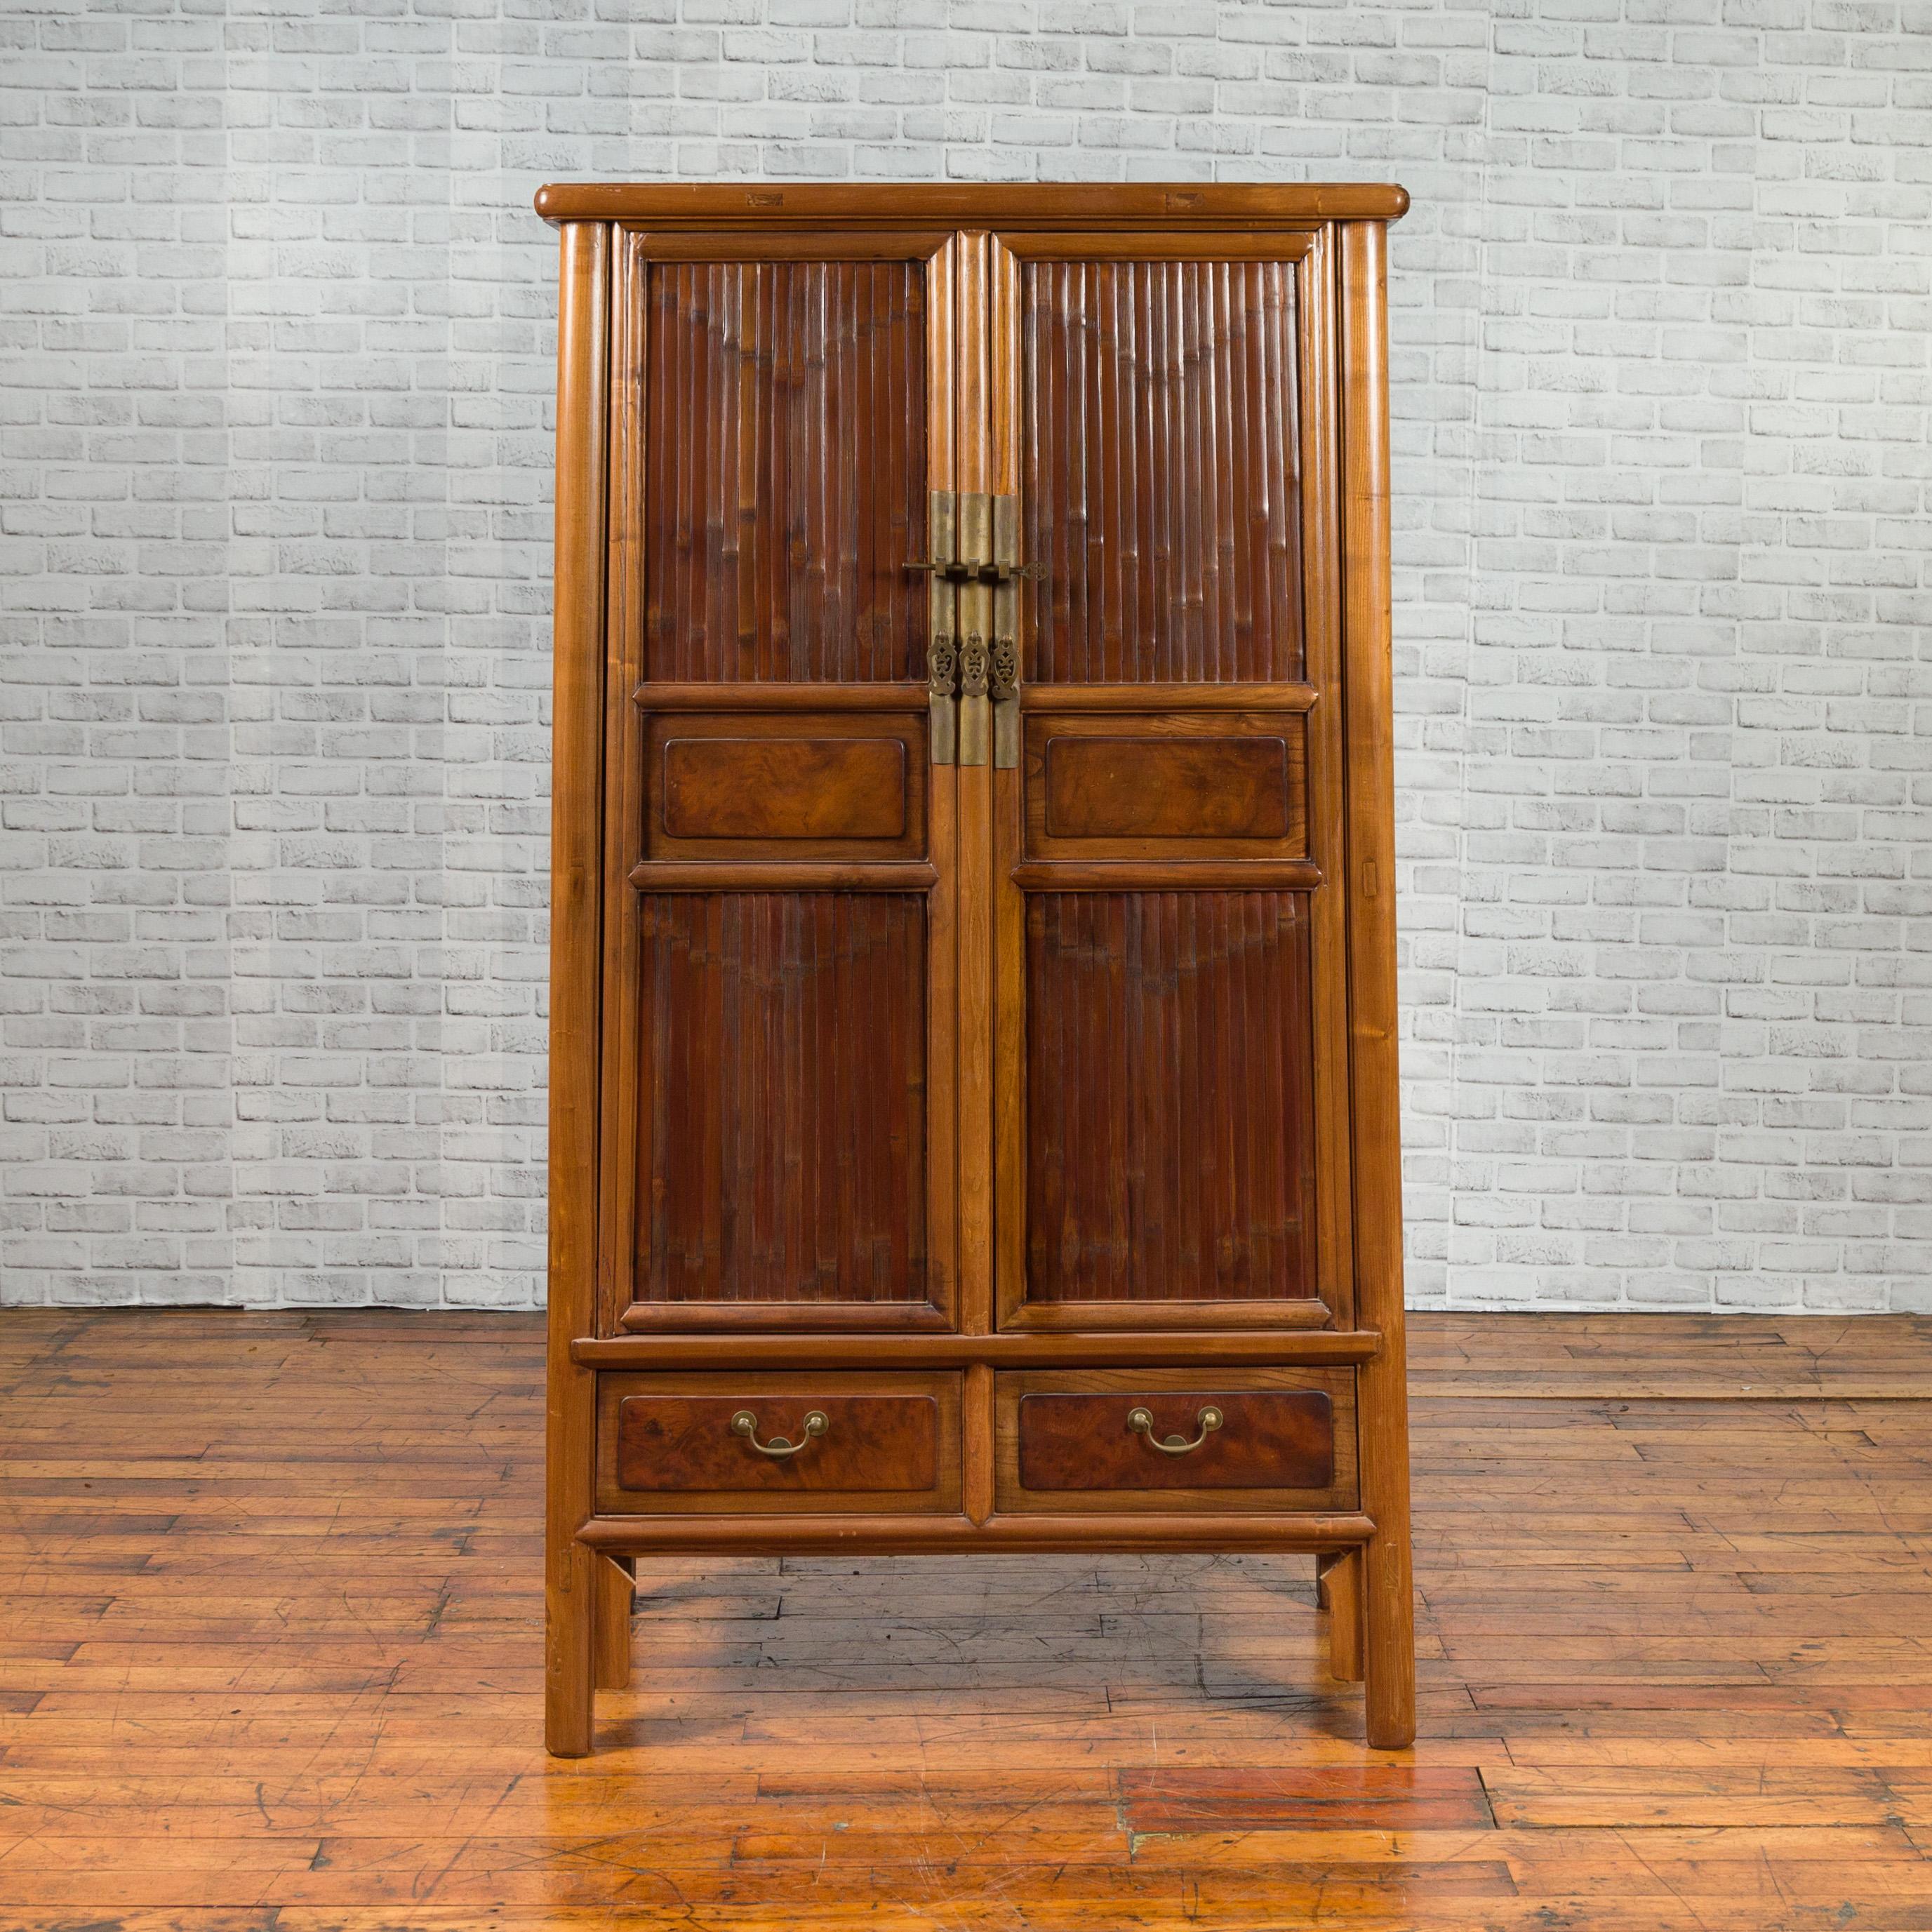 Chinese 19th Century Qing Dynasty Elm and Bamboo Noodle Cabinet with Drawers In Good Condition For Sale In Yonkers, NY